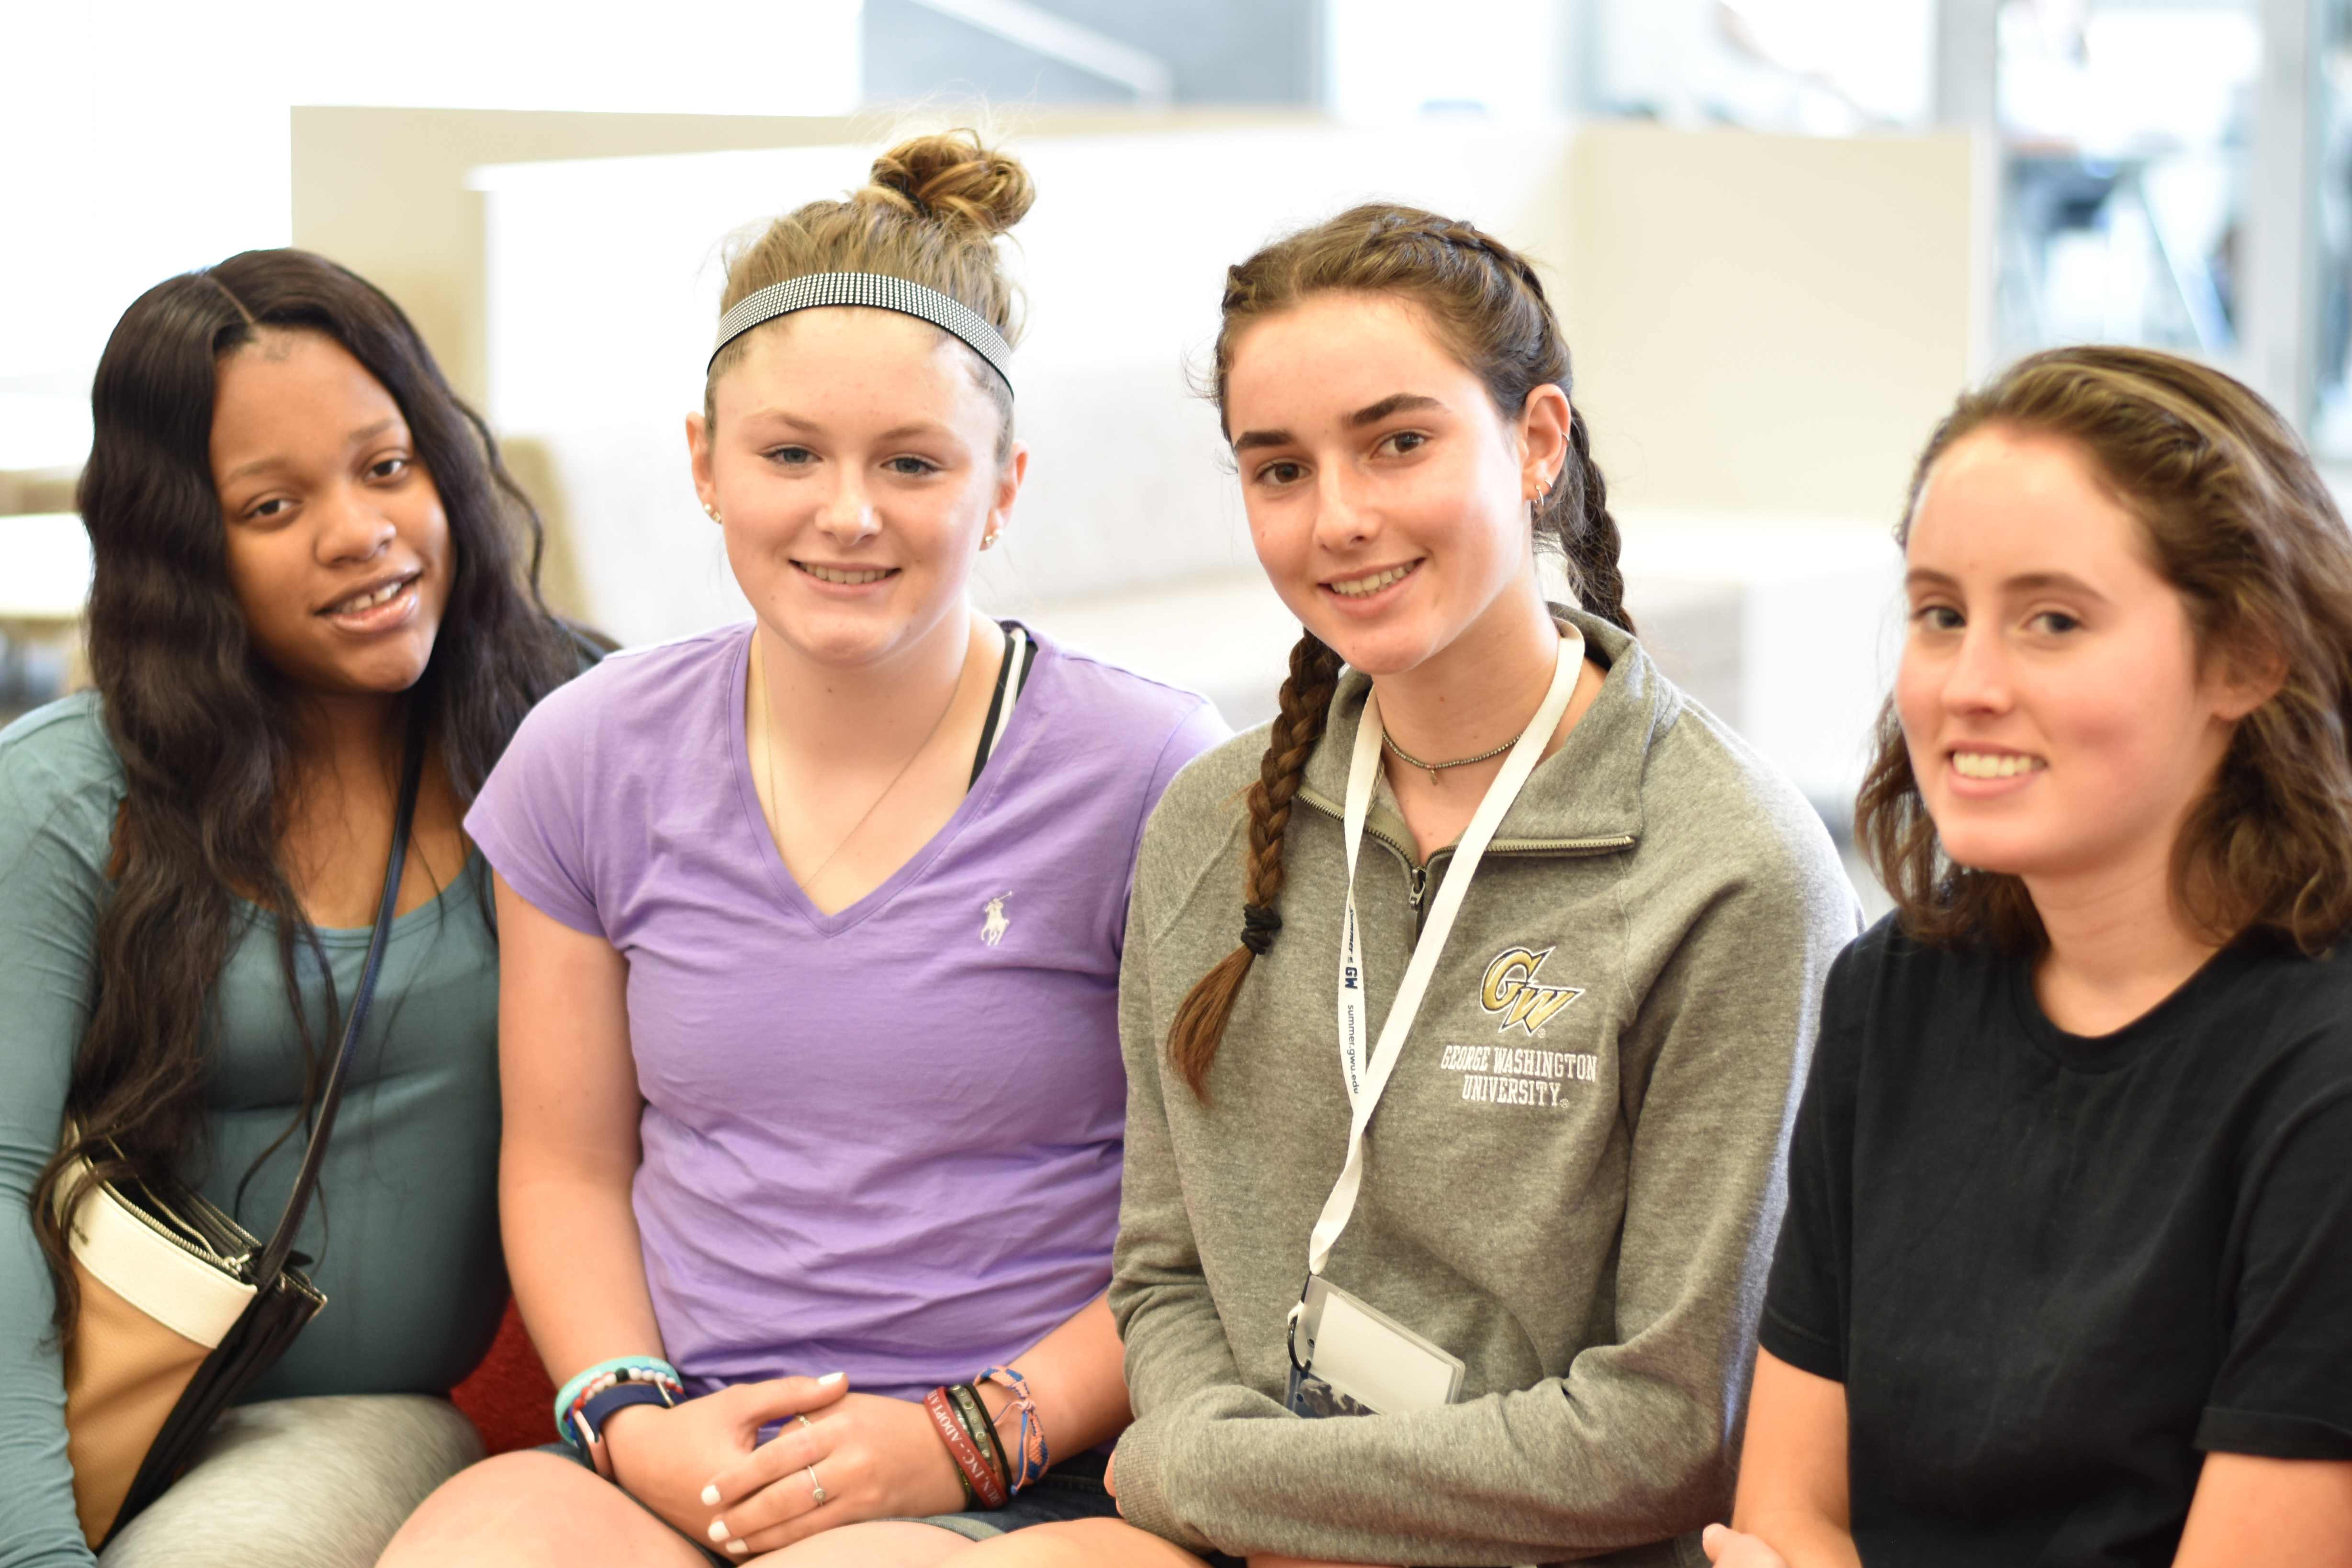 High school students Pierra Hester, Jacqui Hayes, Emily Makedon and Laura Biggs were students in Jason Zara's pre-college biomed